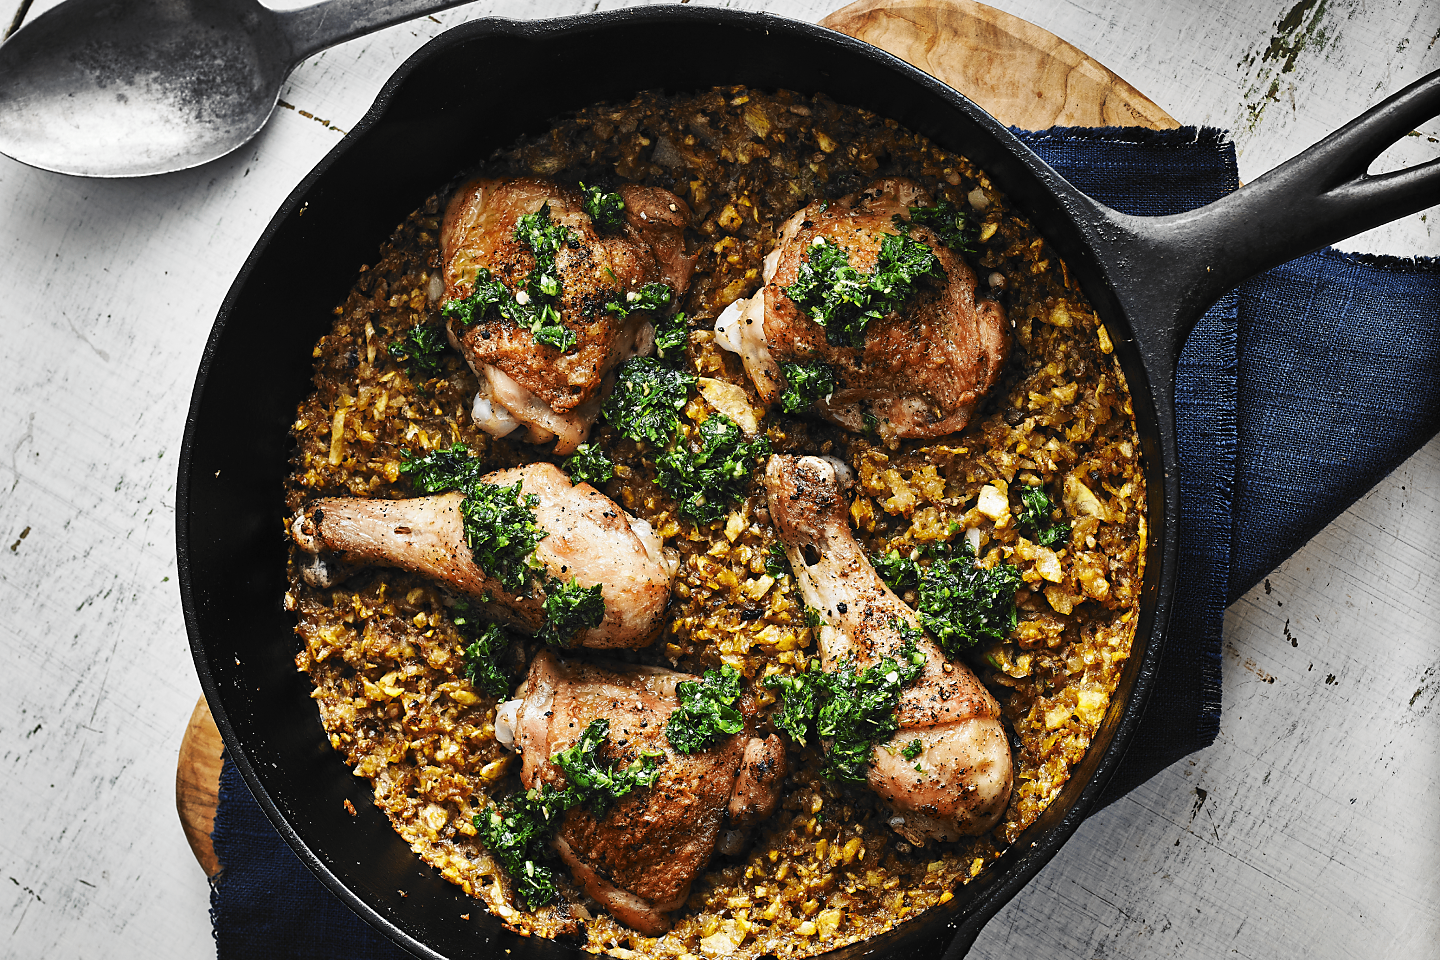 Cast iron skillet filled with baked chicken and rice medley